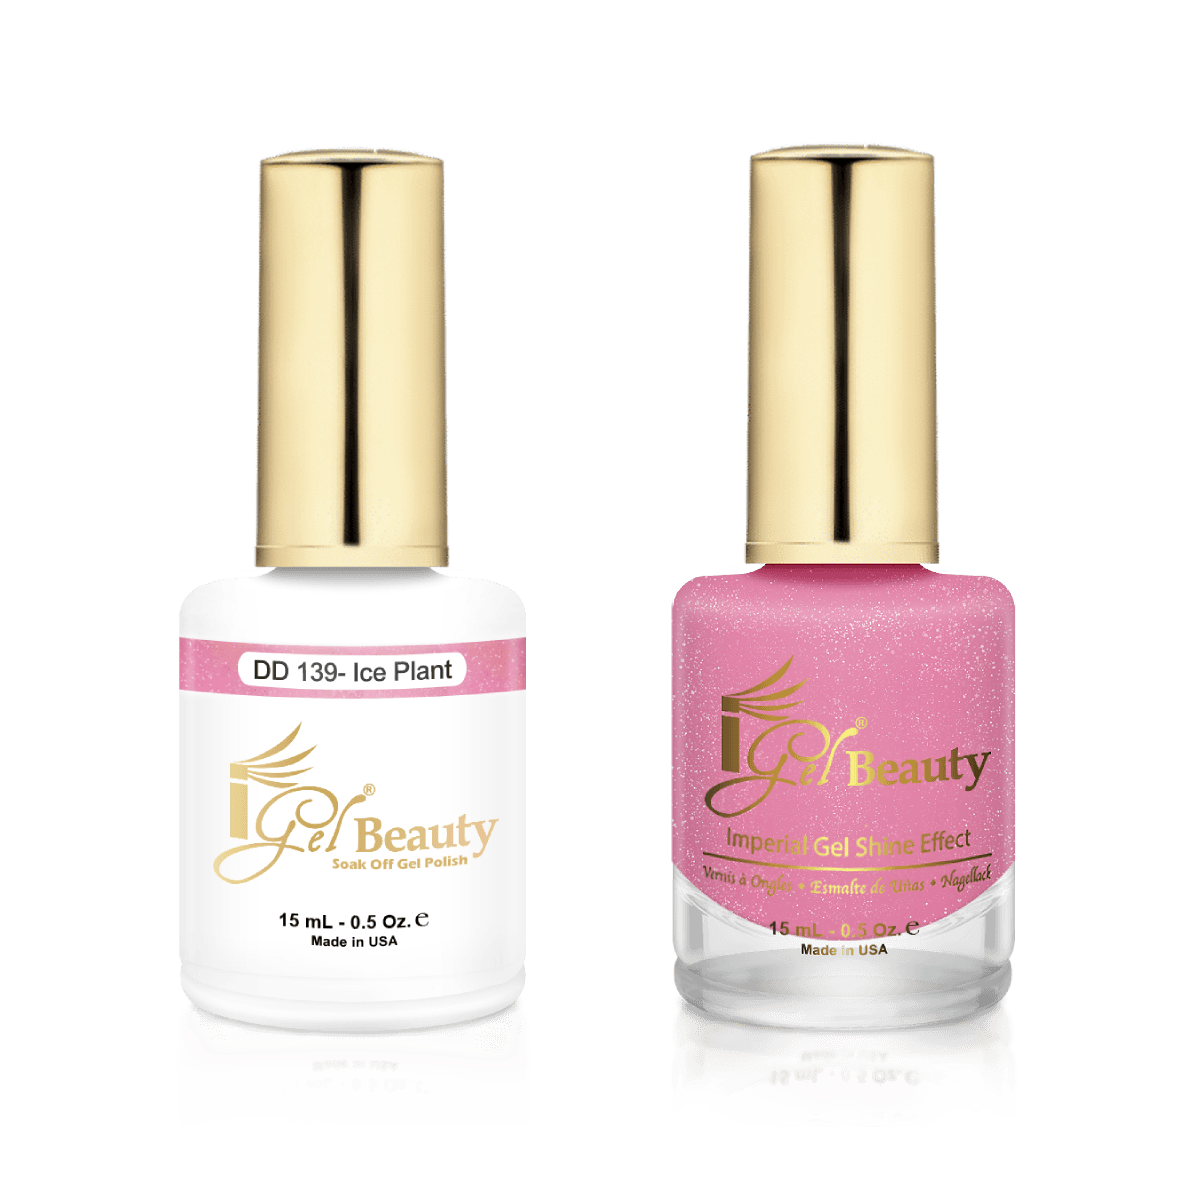 IGel Duo Gel Polish + Matching Nail Lacquer DD 139 ICE PLANT